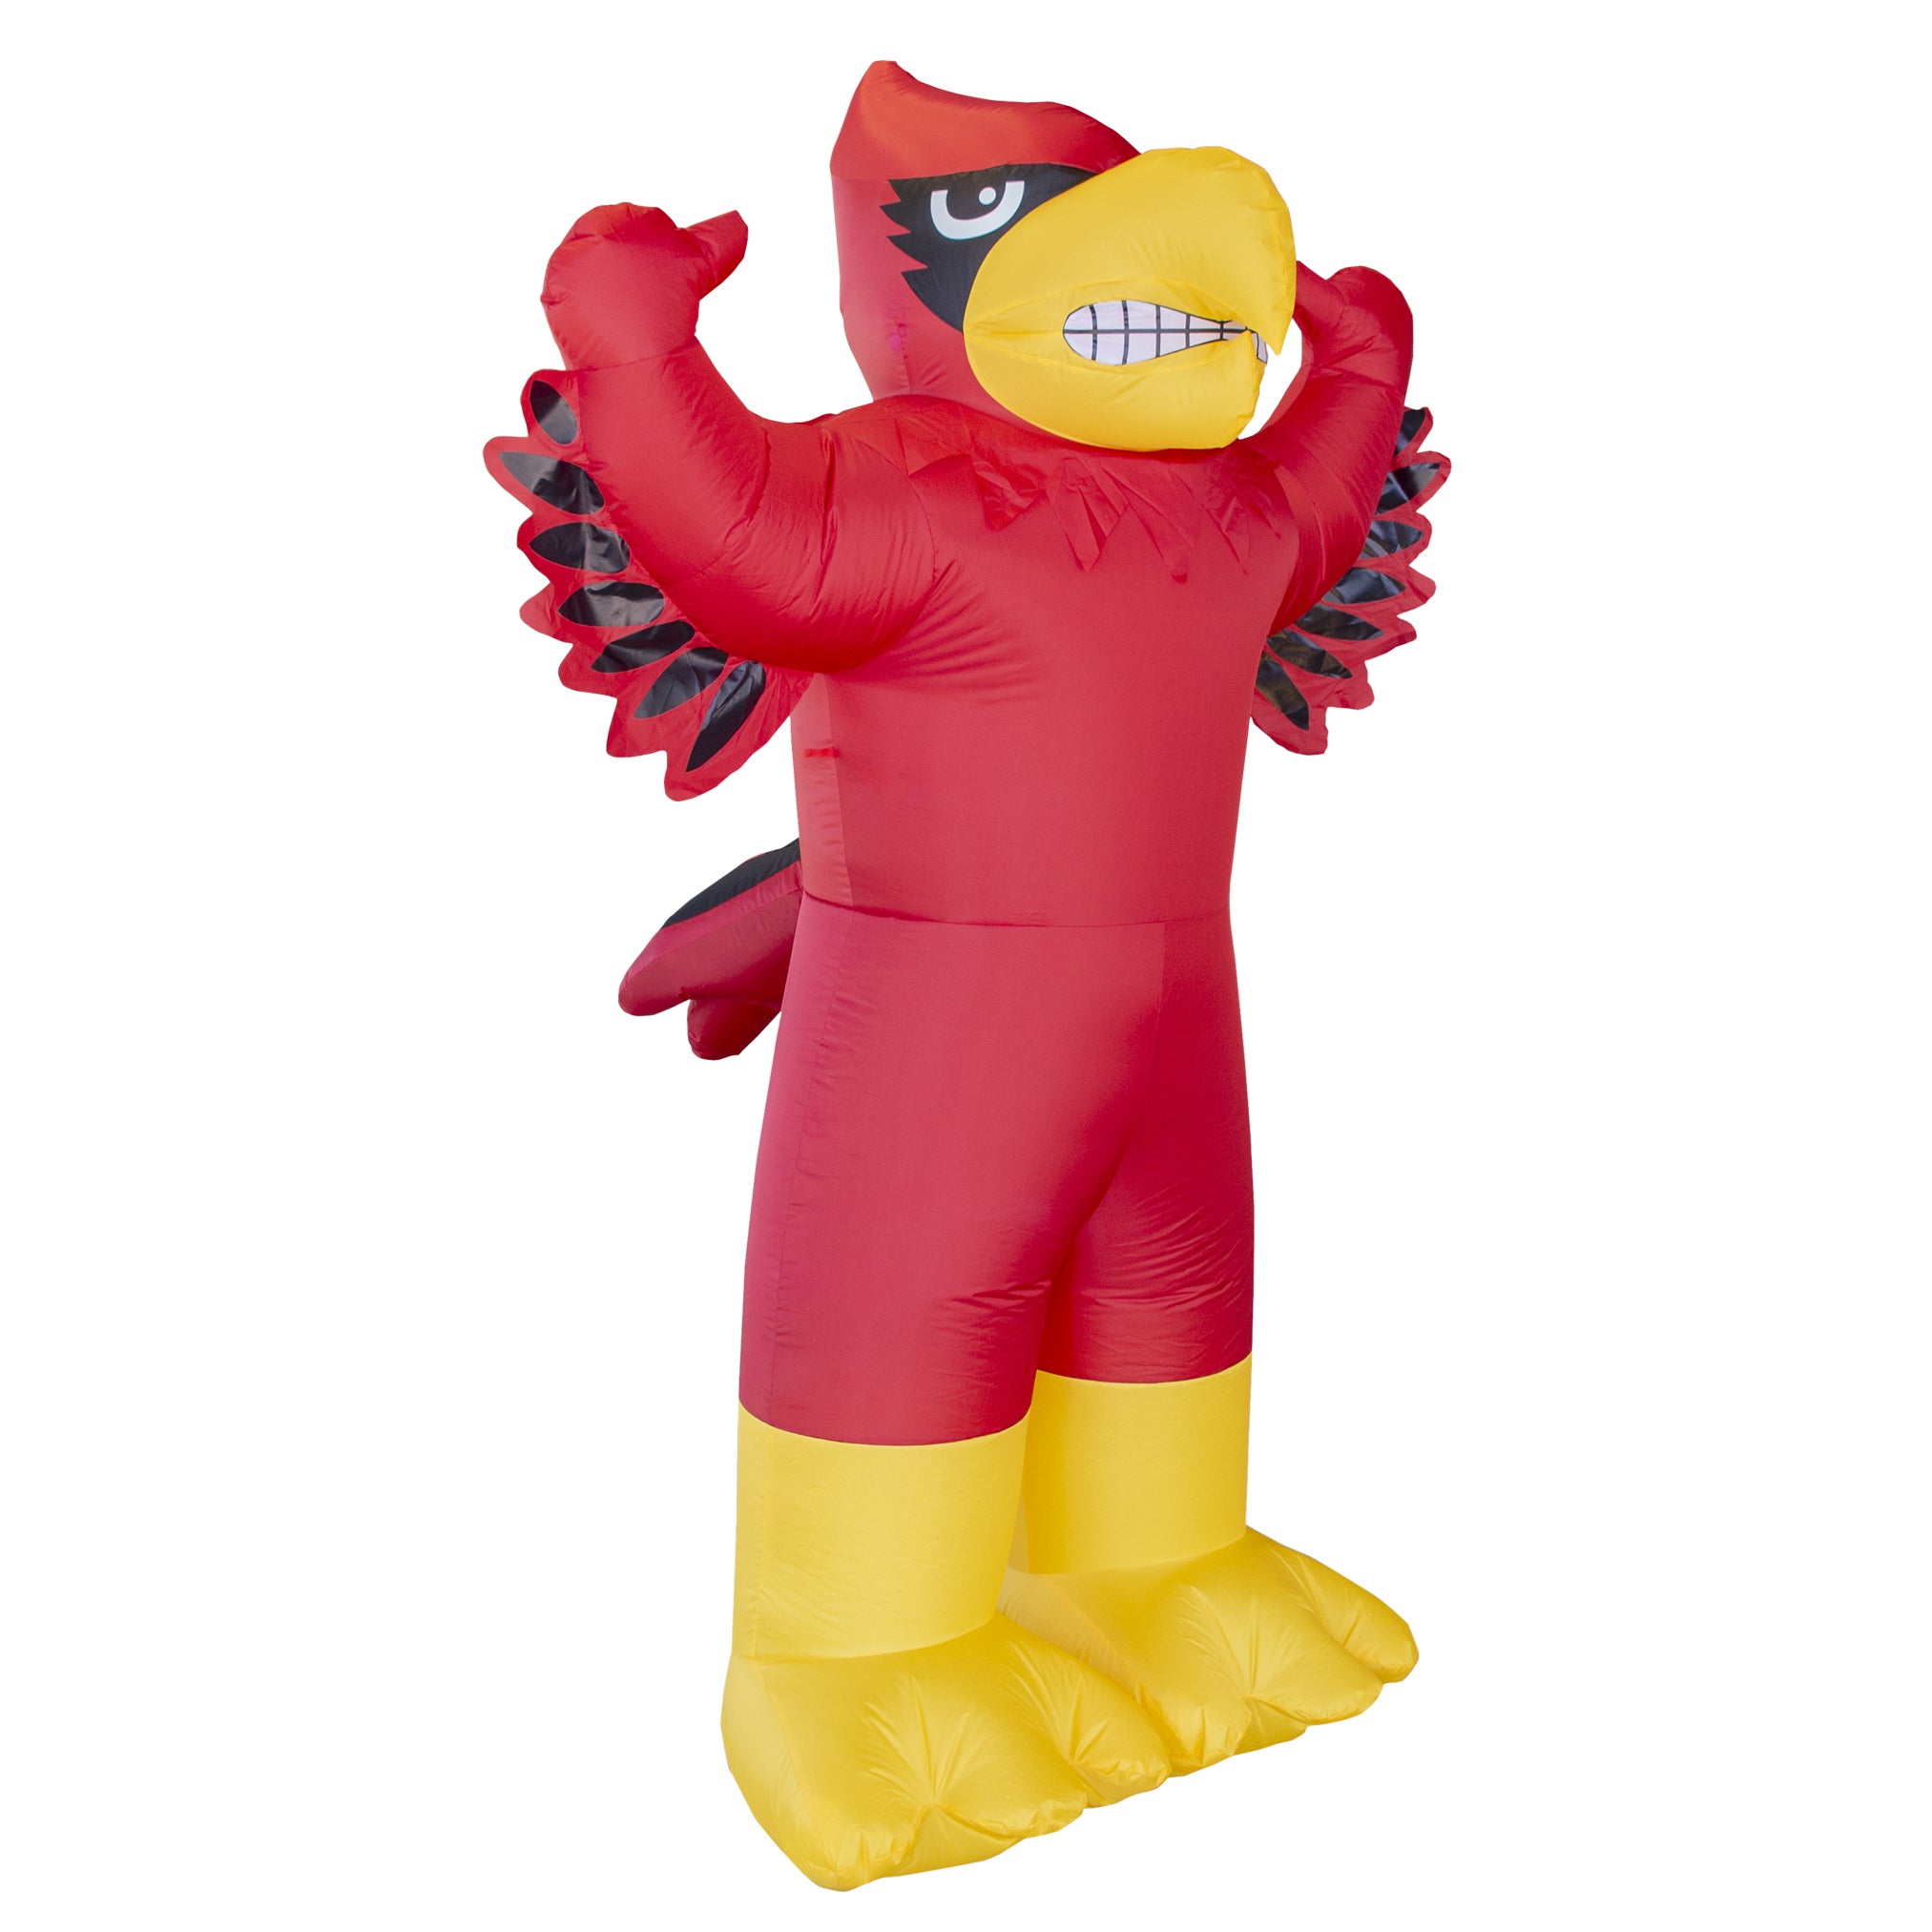 Logo Brands St. Louis Cardinals Inflatable Mascot in the Sports